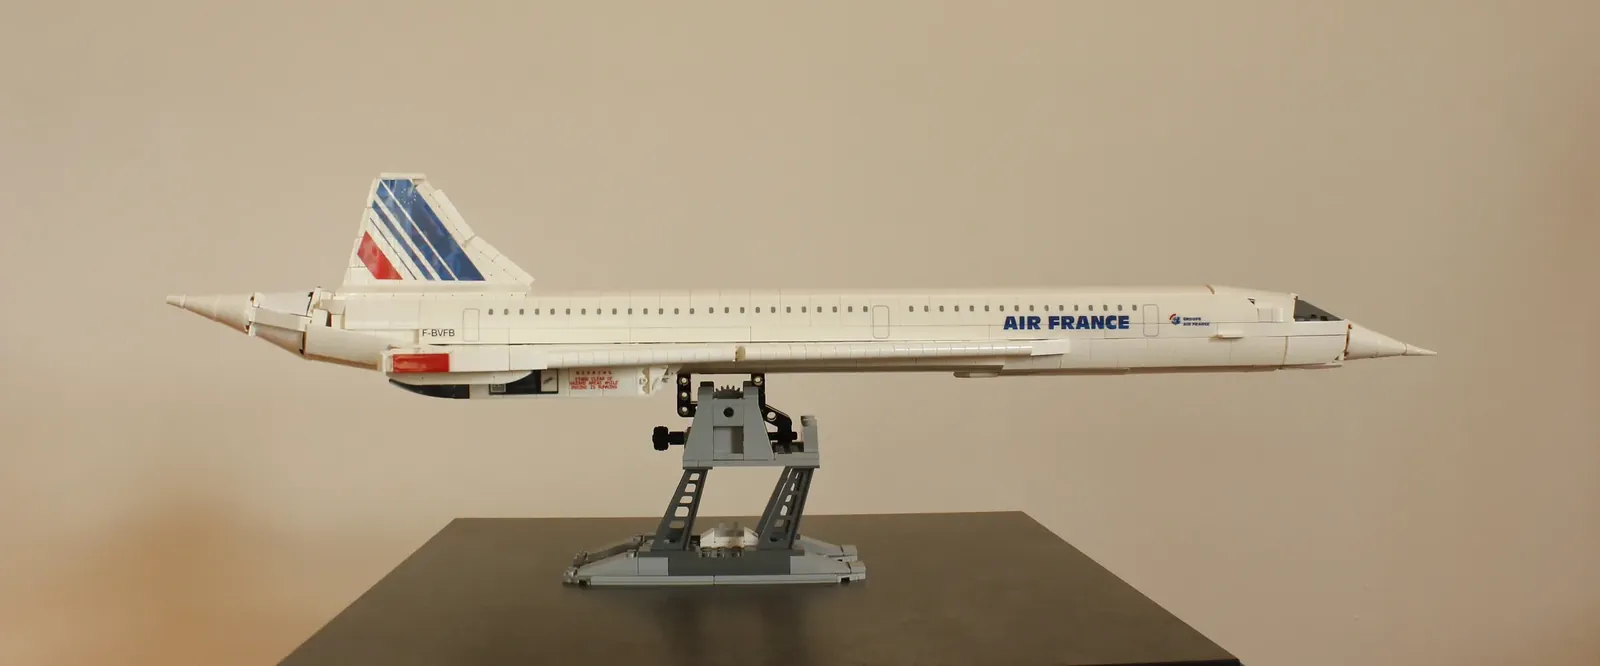 THE LEGENDARY CONCORDE Achieves 10K Supports on LEGO IDEAS